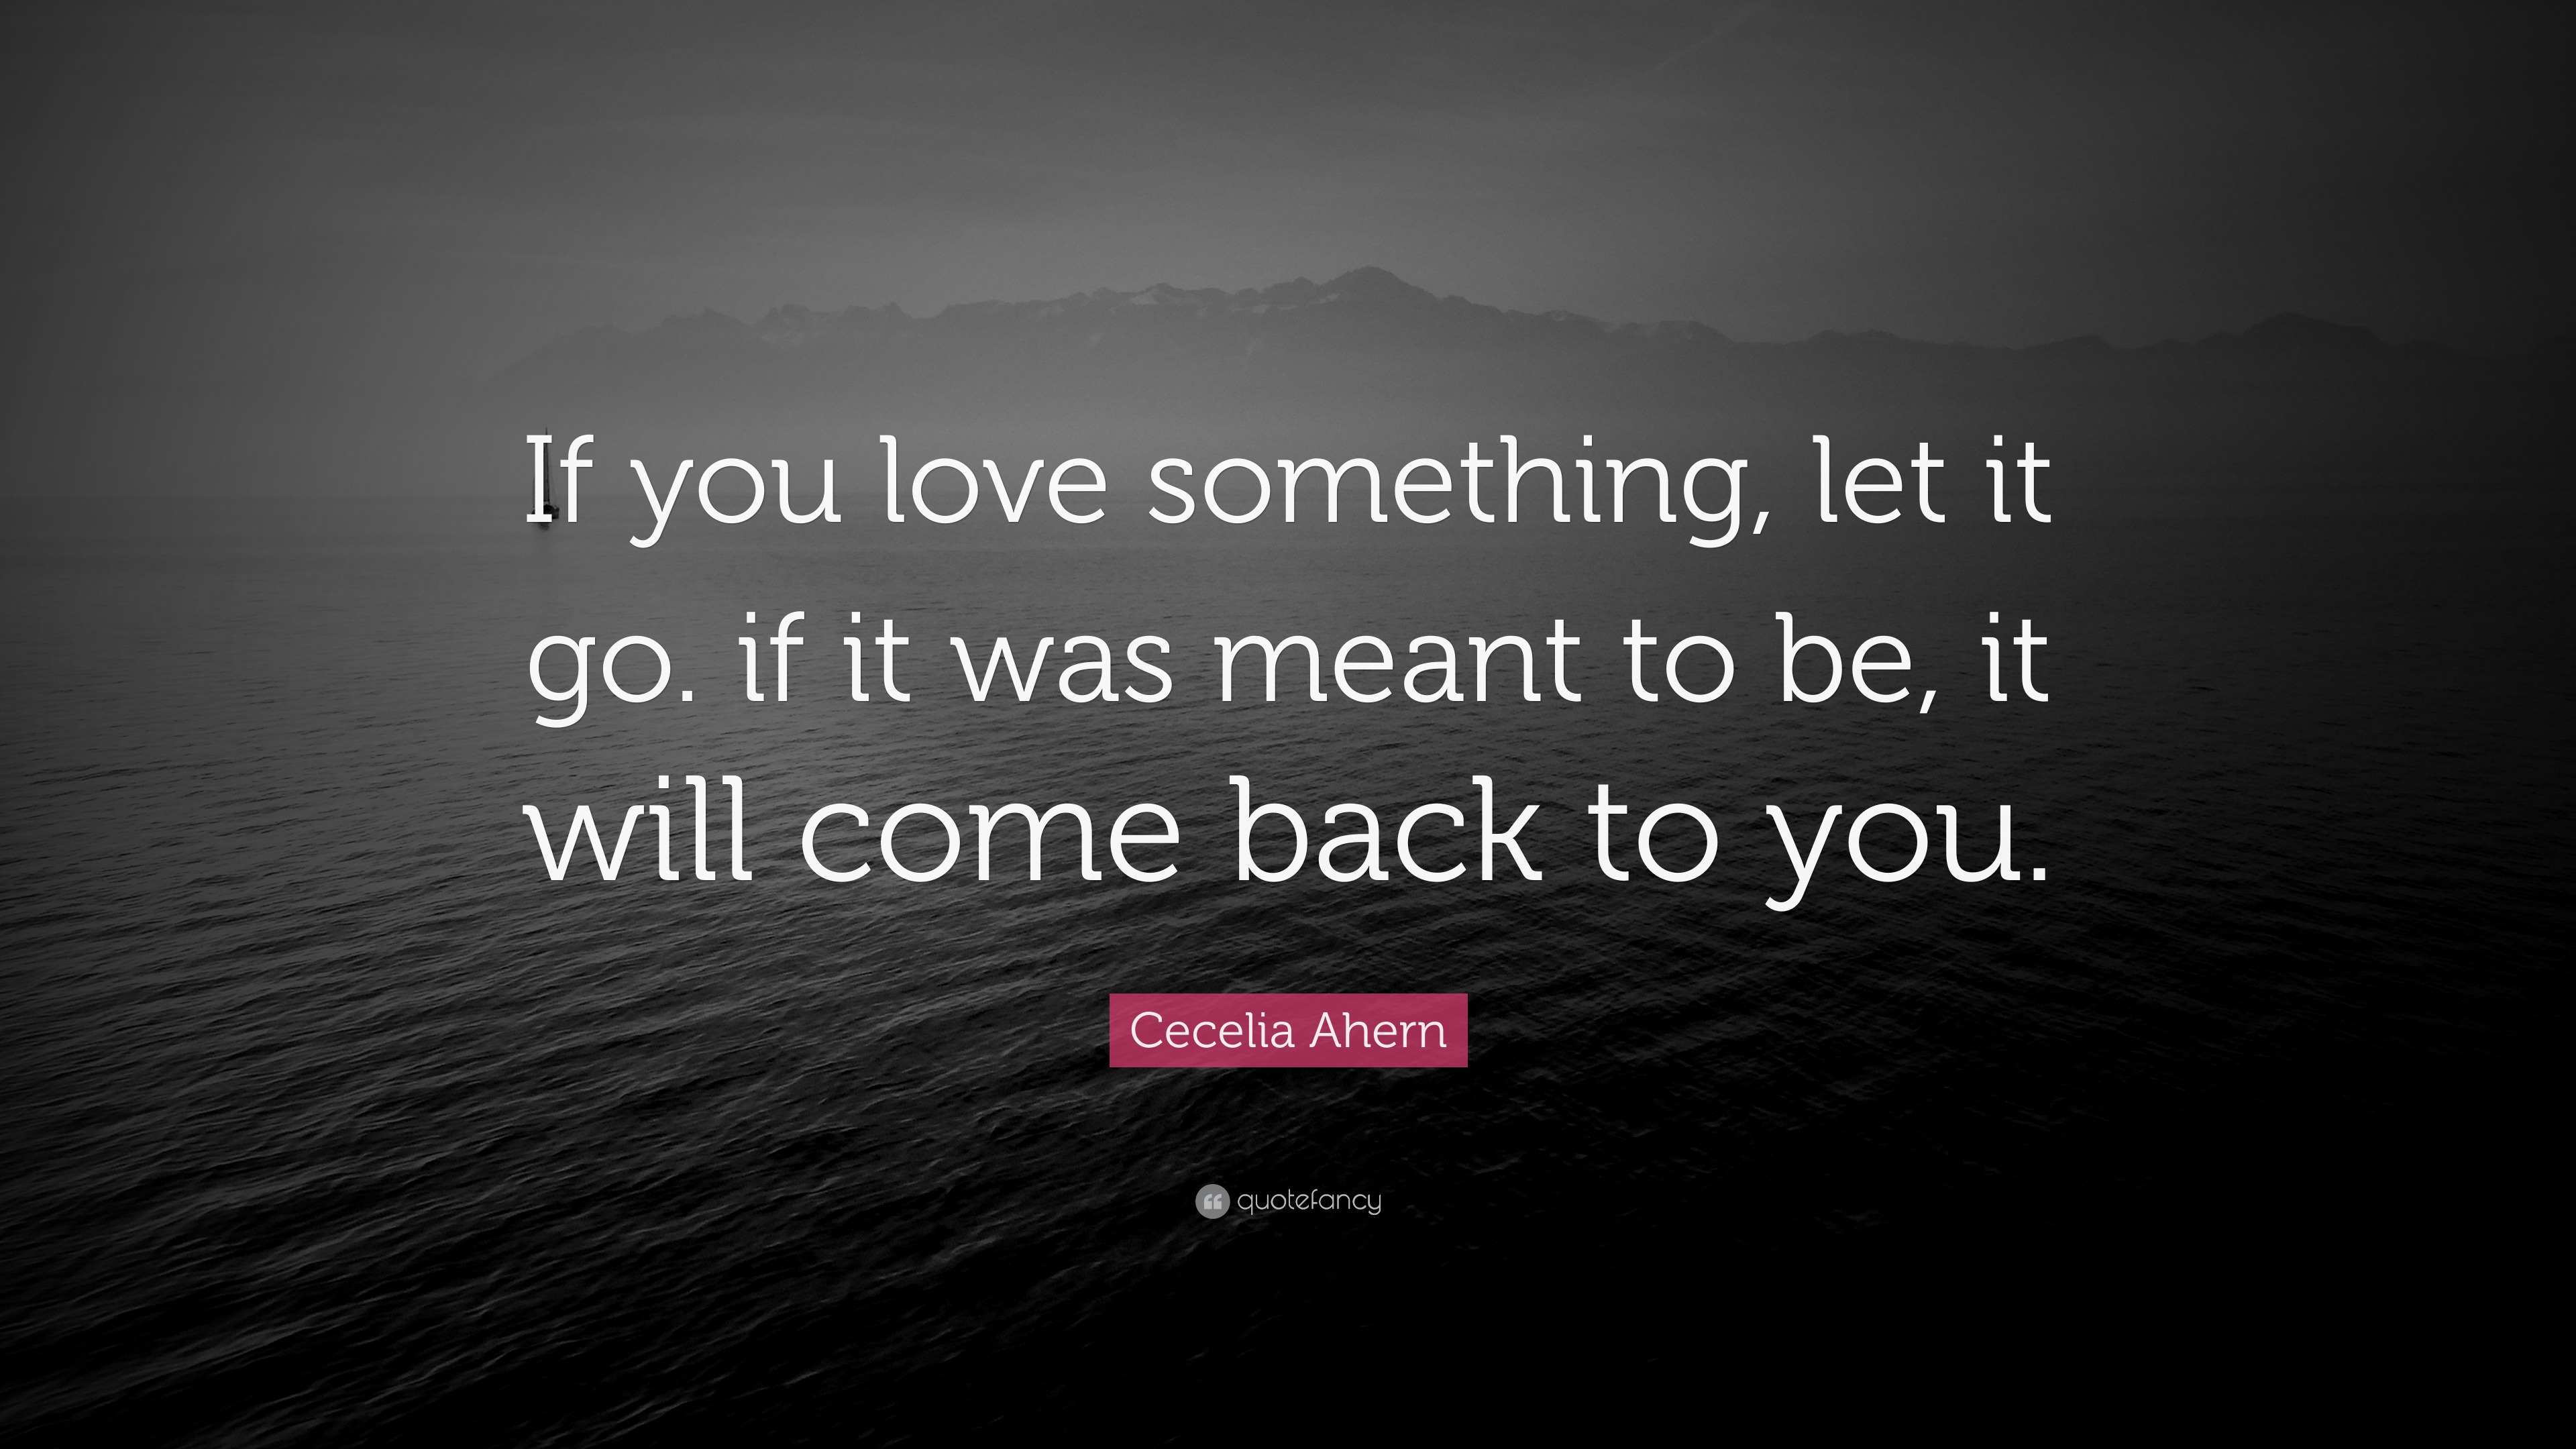 Fresh if U Love something Let It Go Quotes | Love quotes collection ...